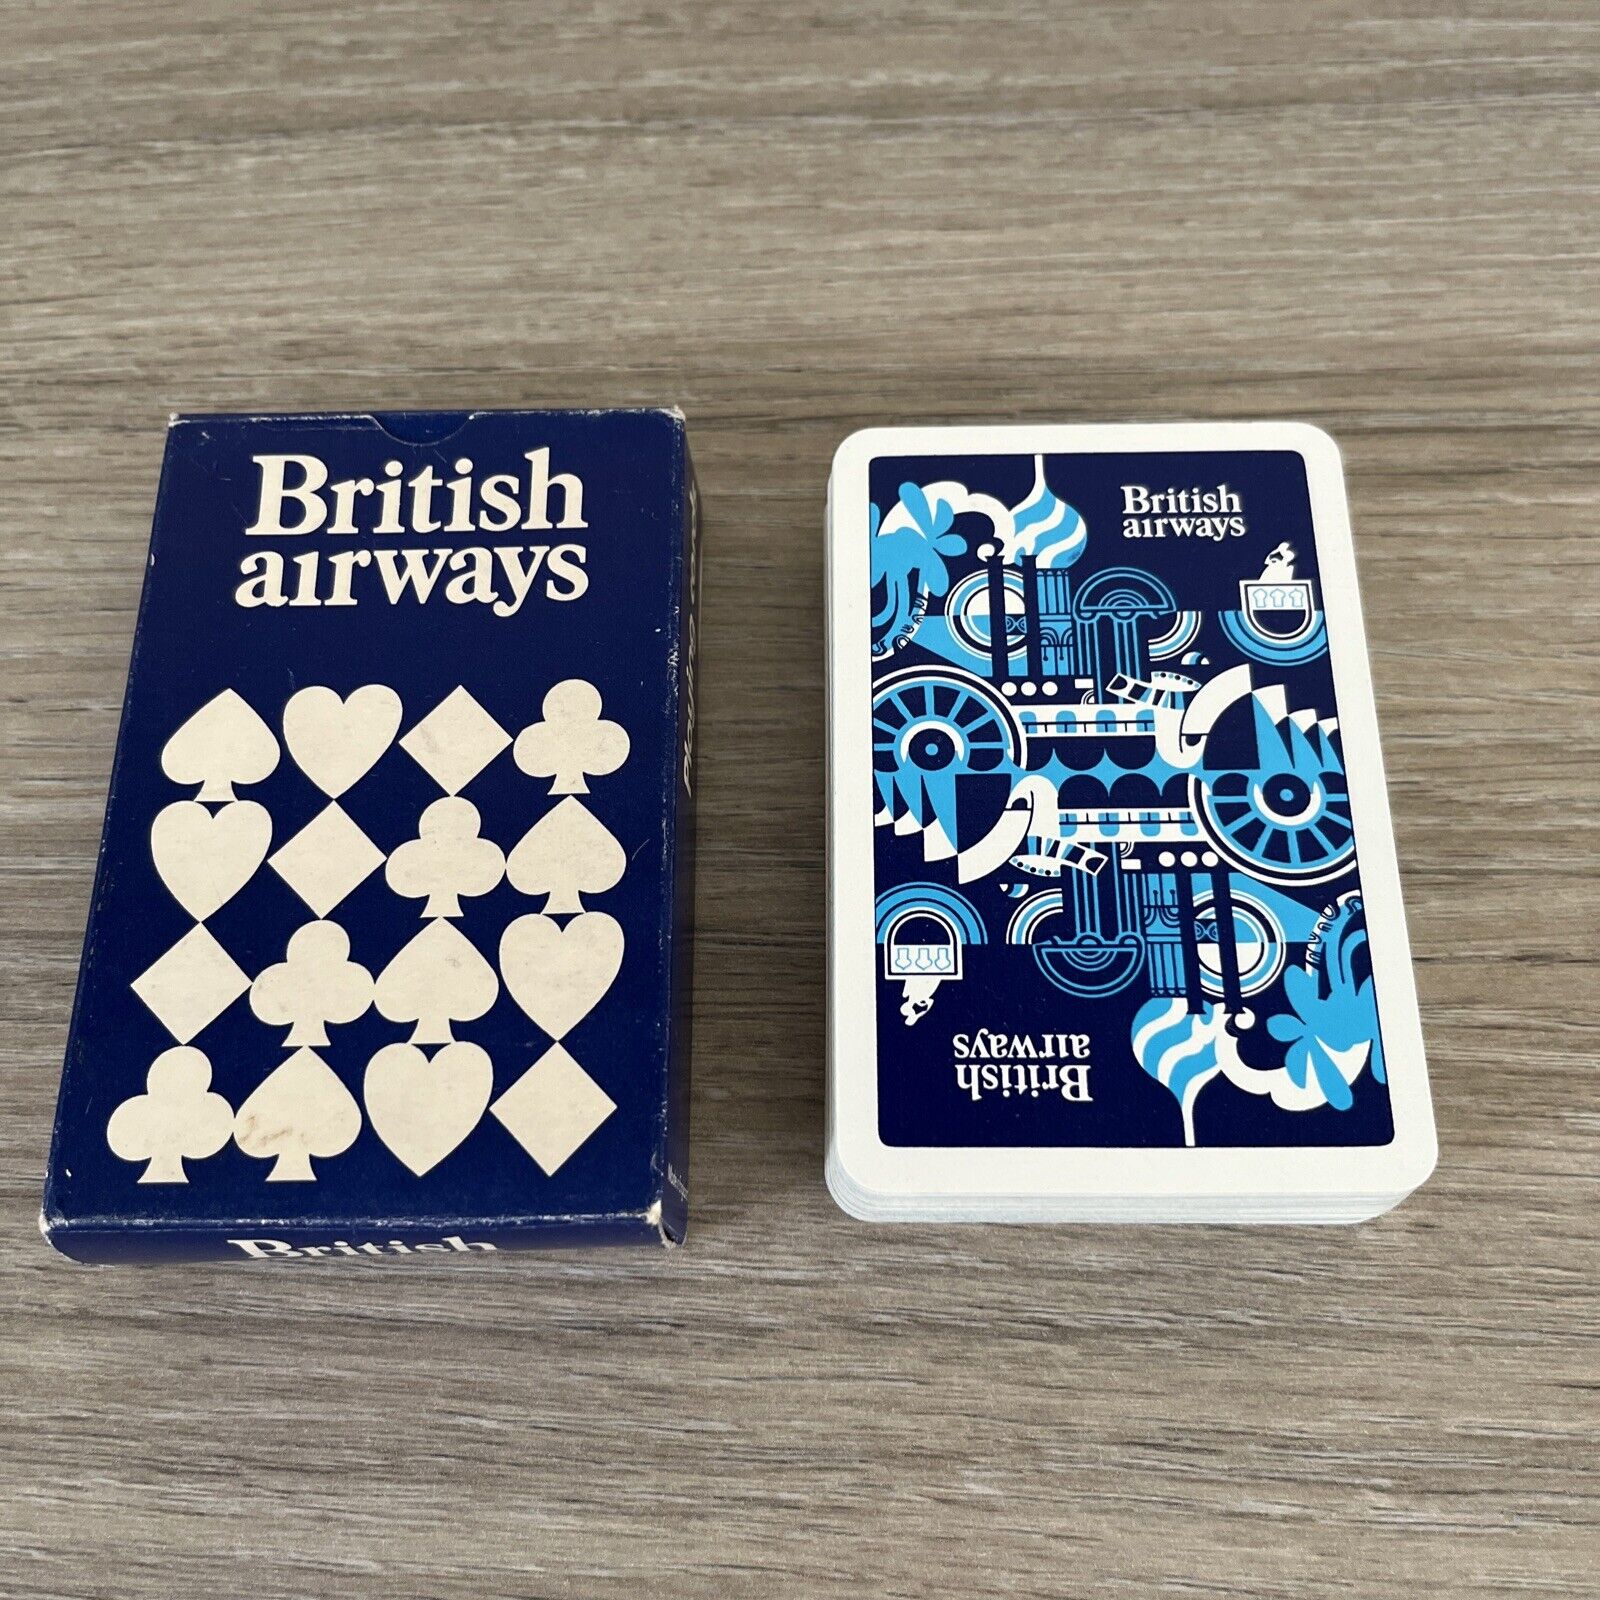 British Airways - Airline Memorabilia - Playing Cards - Complete Set - Pre-Loved